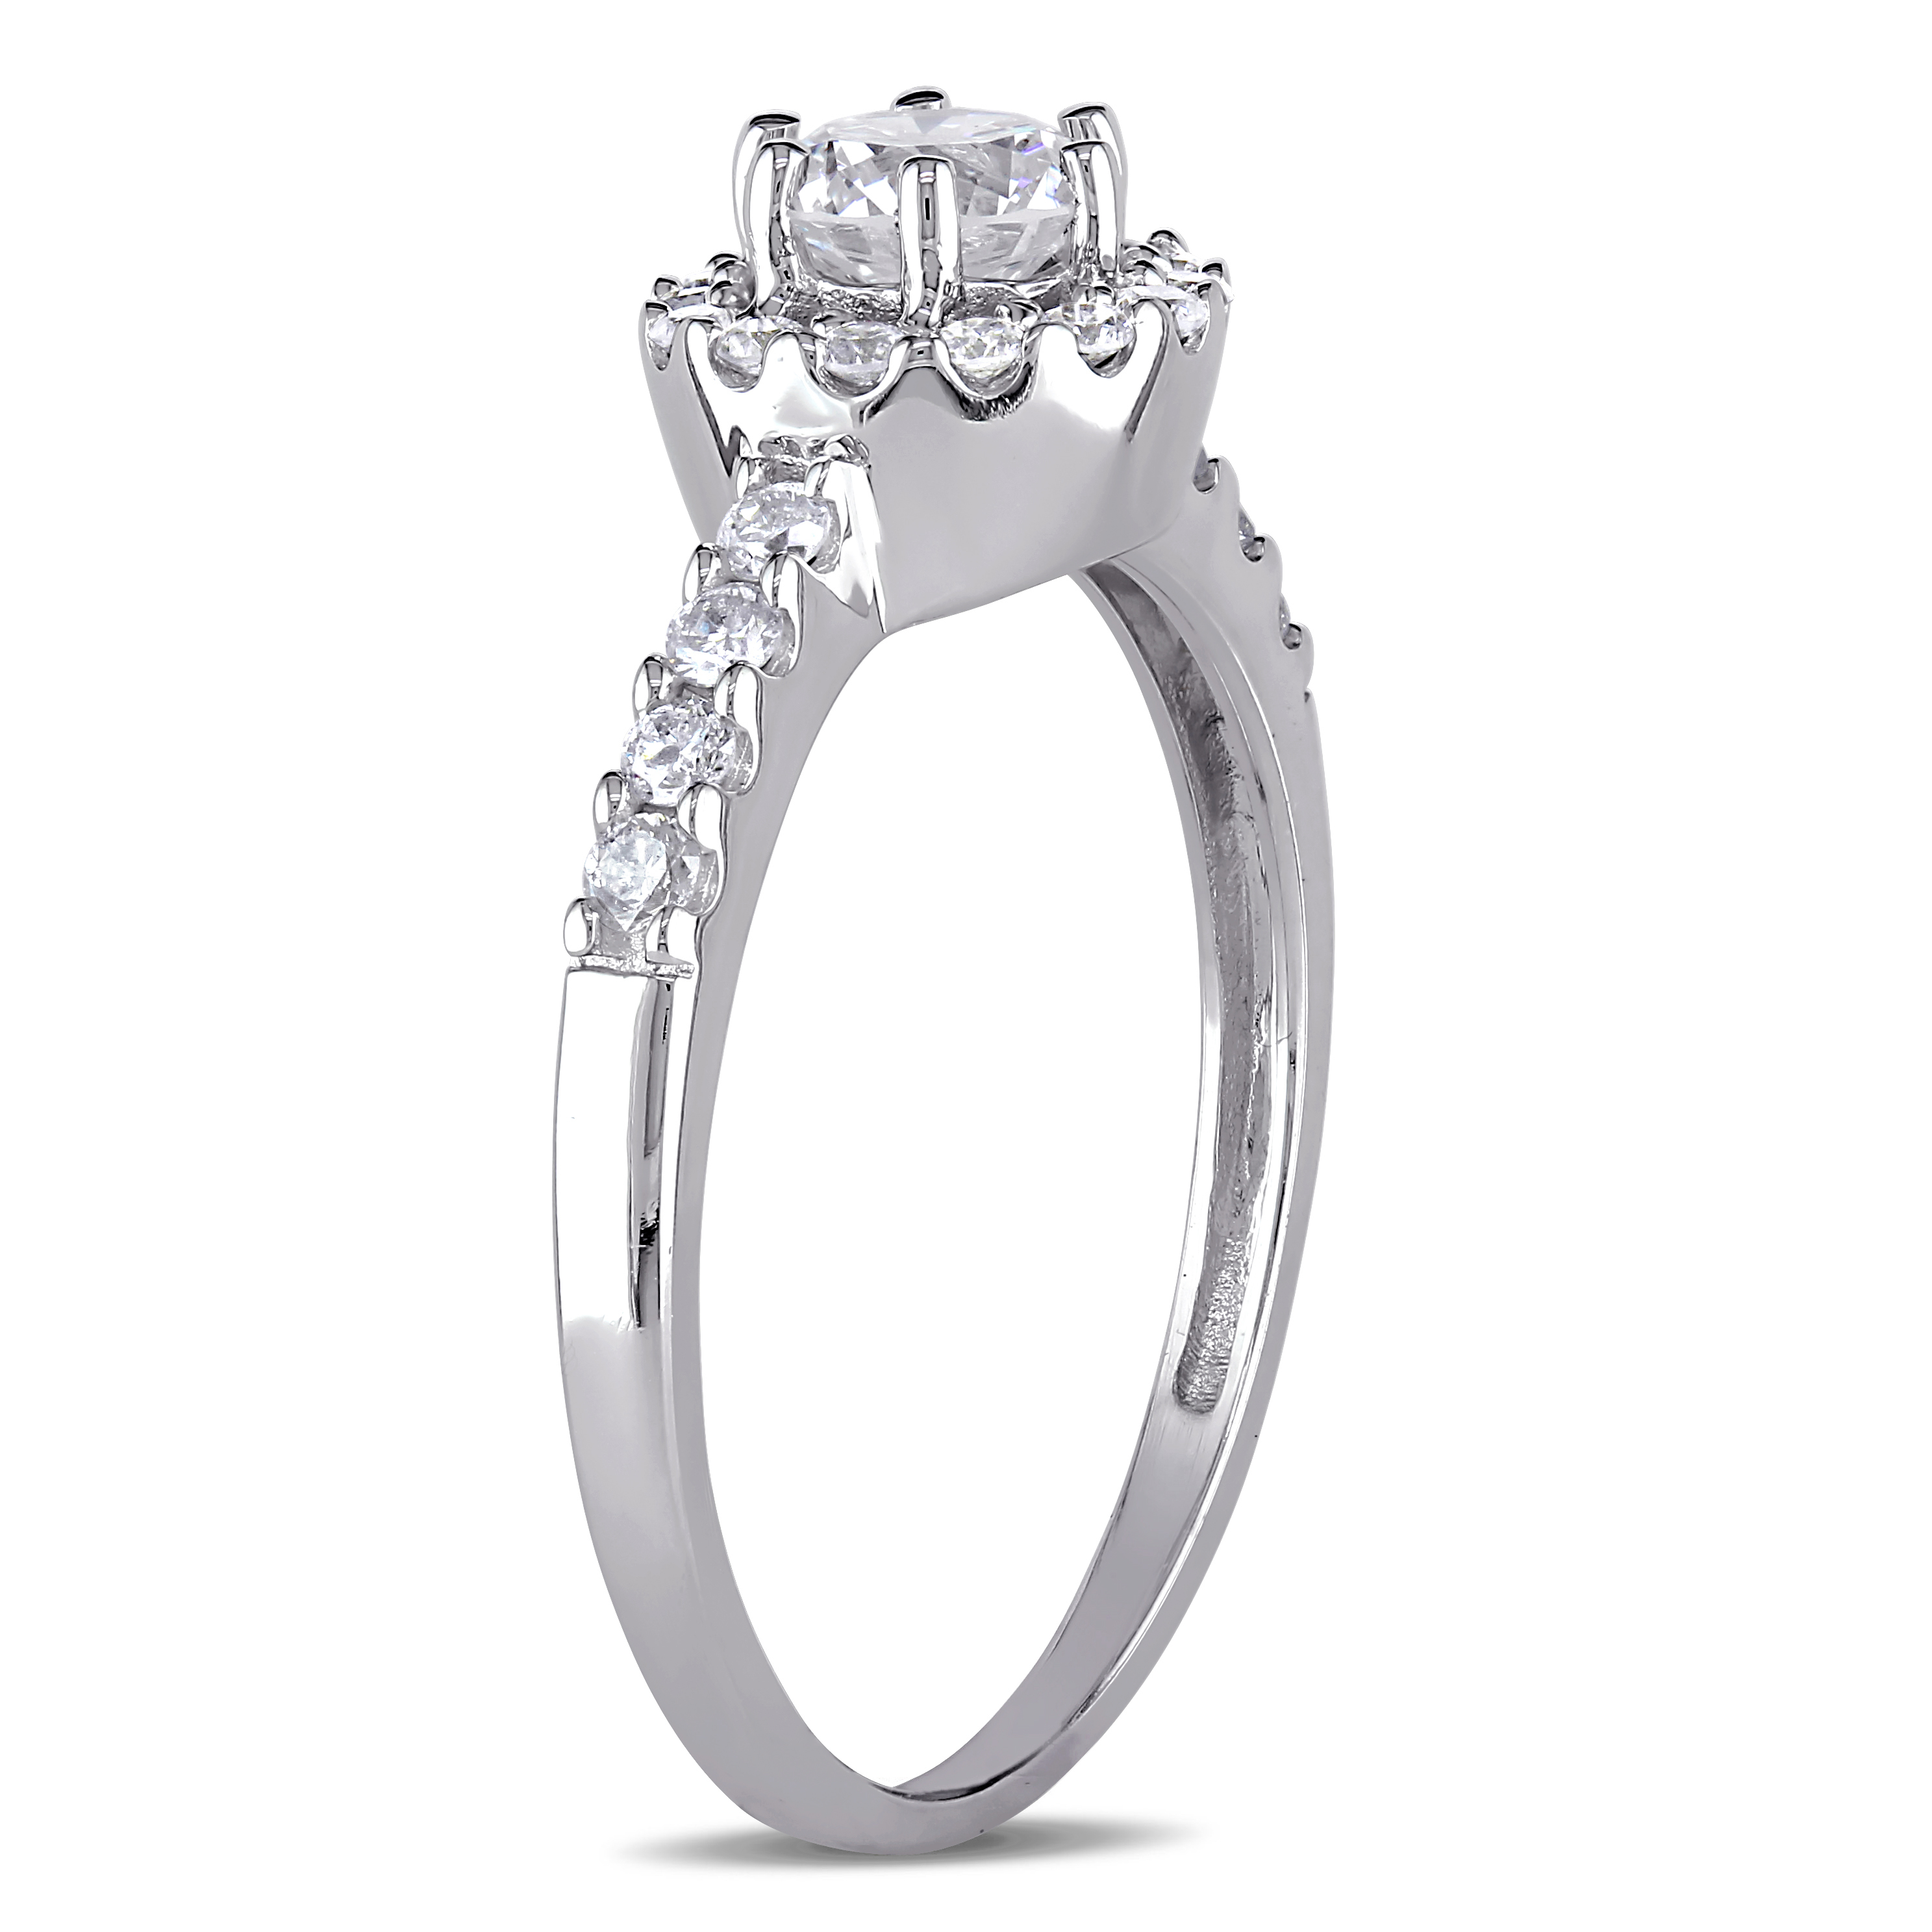 1 CT TW Diamond Halo Engagement Ring in 14k White Gold